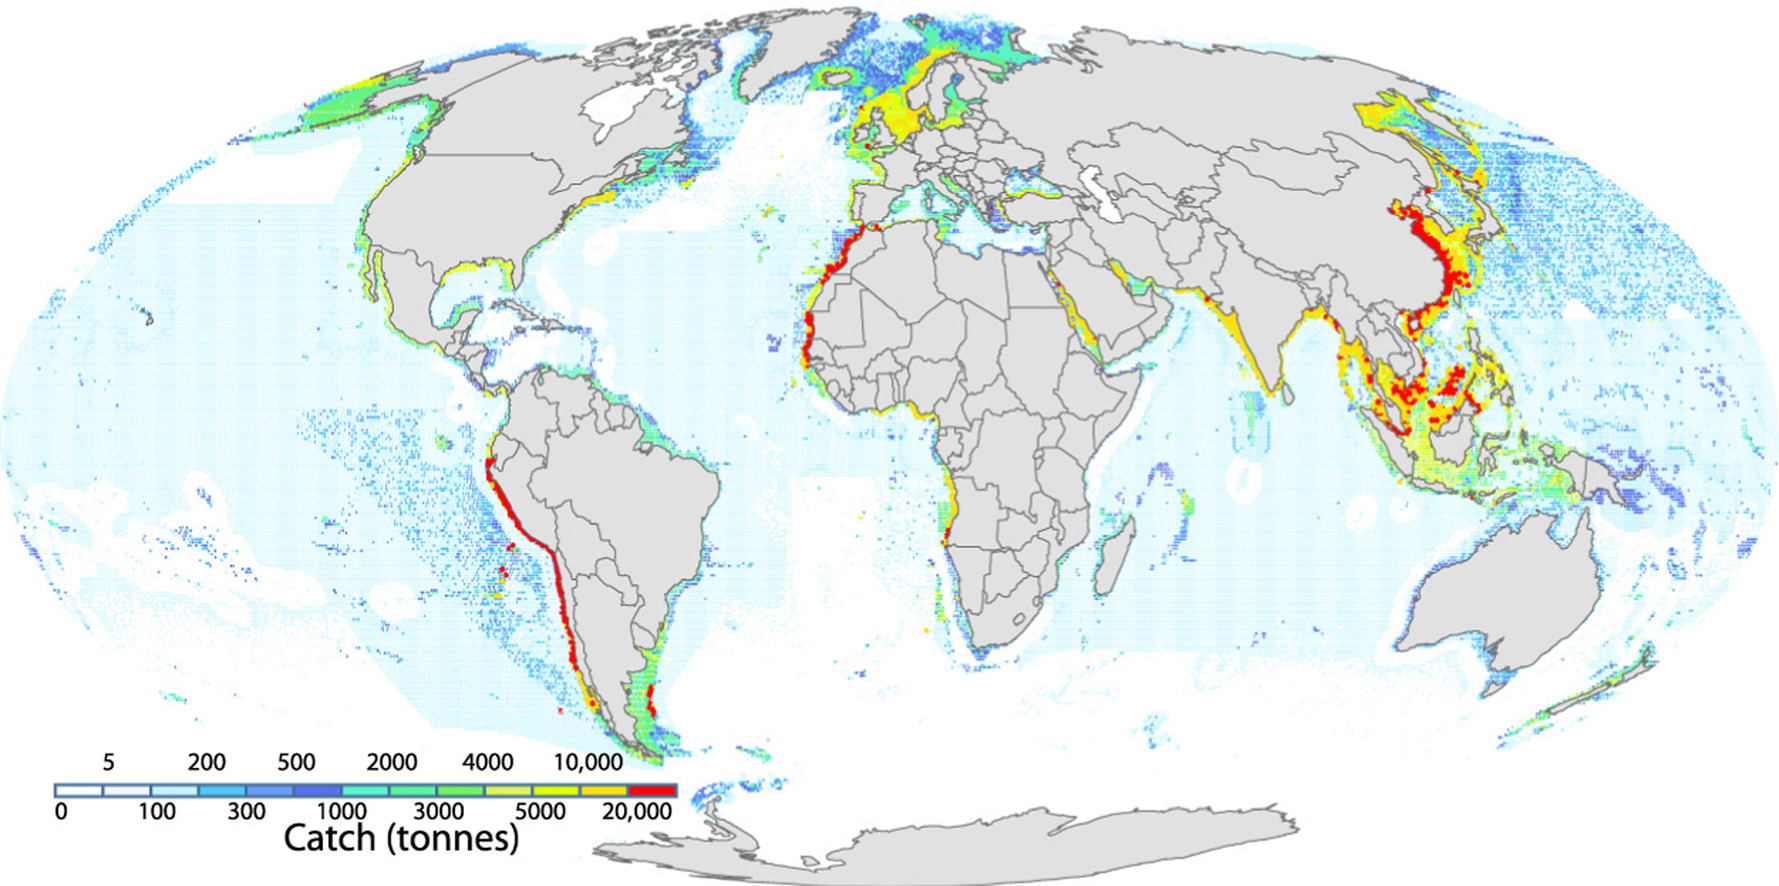 Researchers Map Global Fishing Patterns From 1869 to 2015